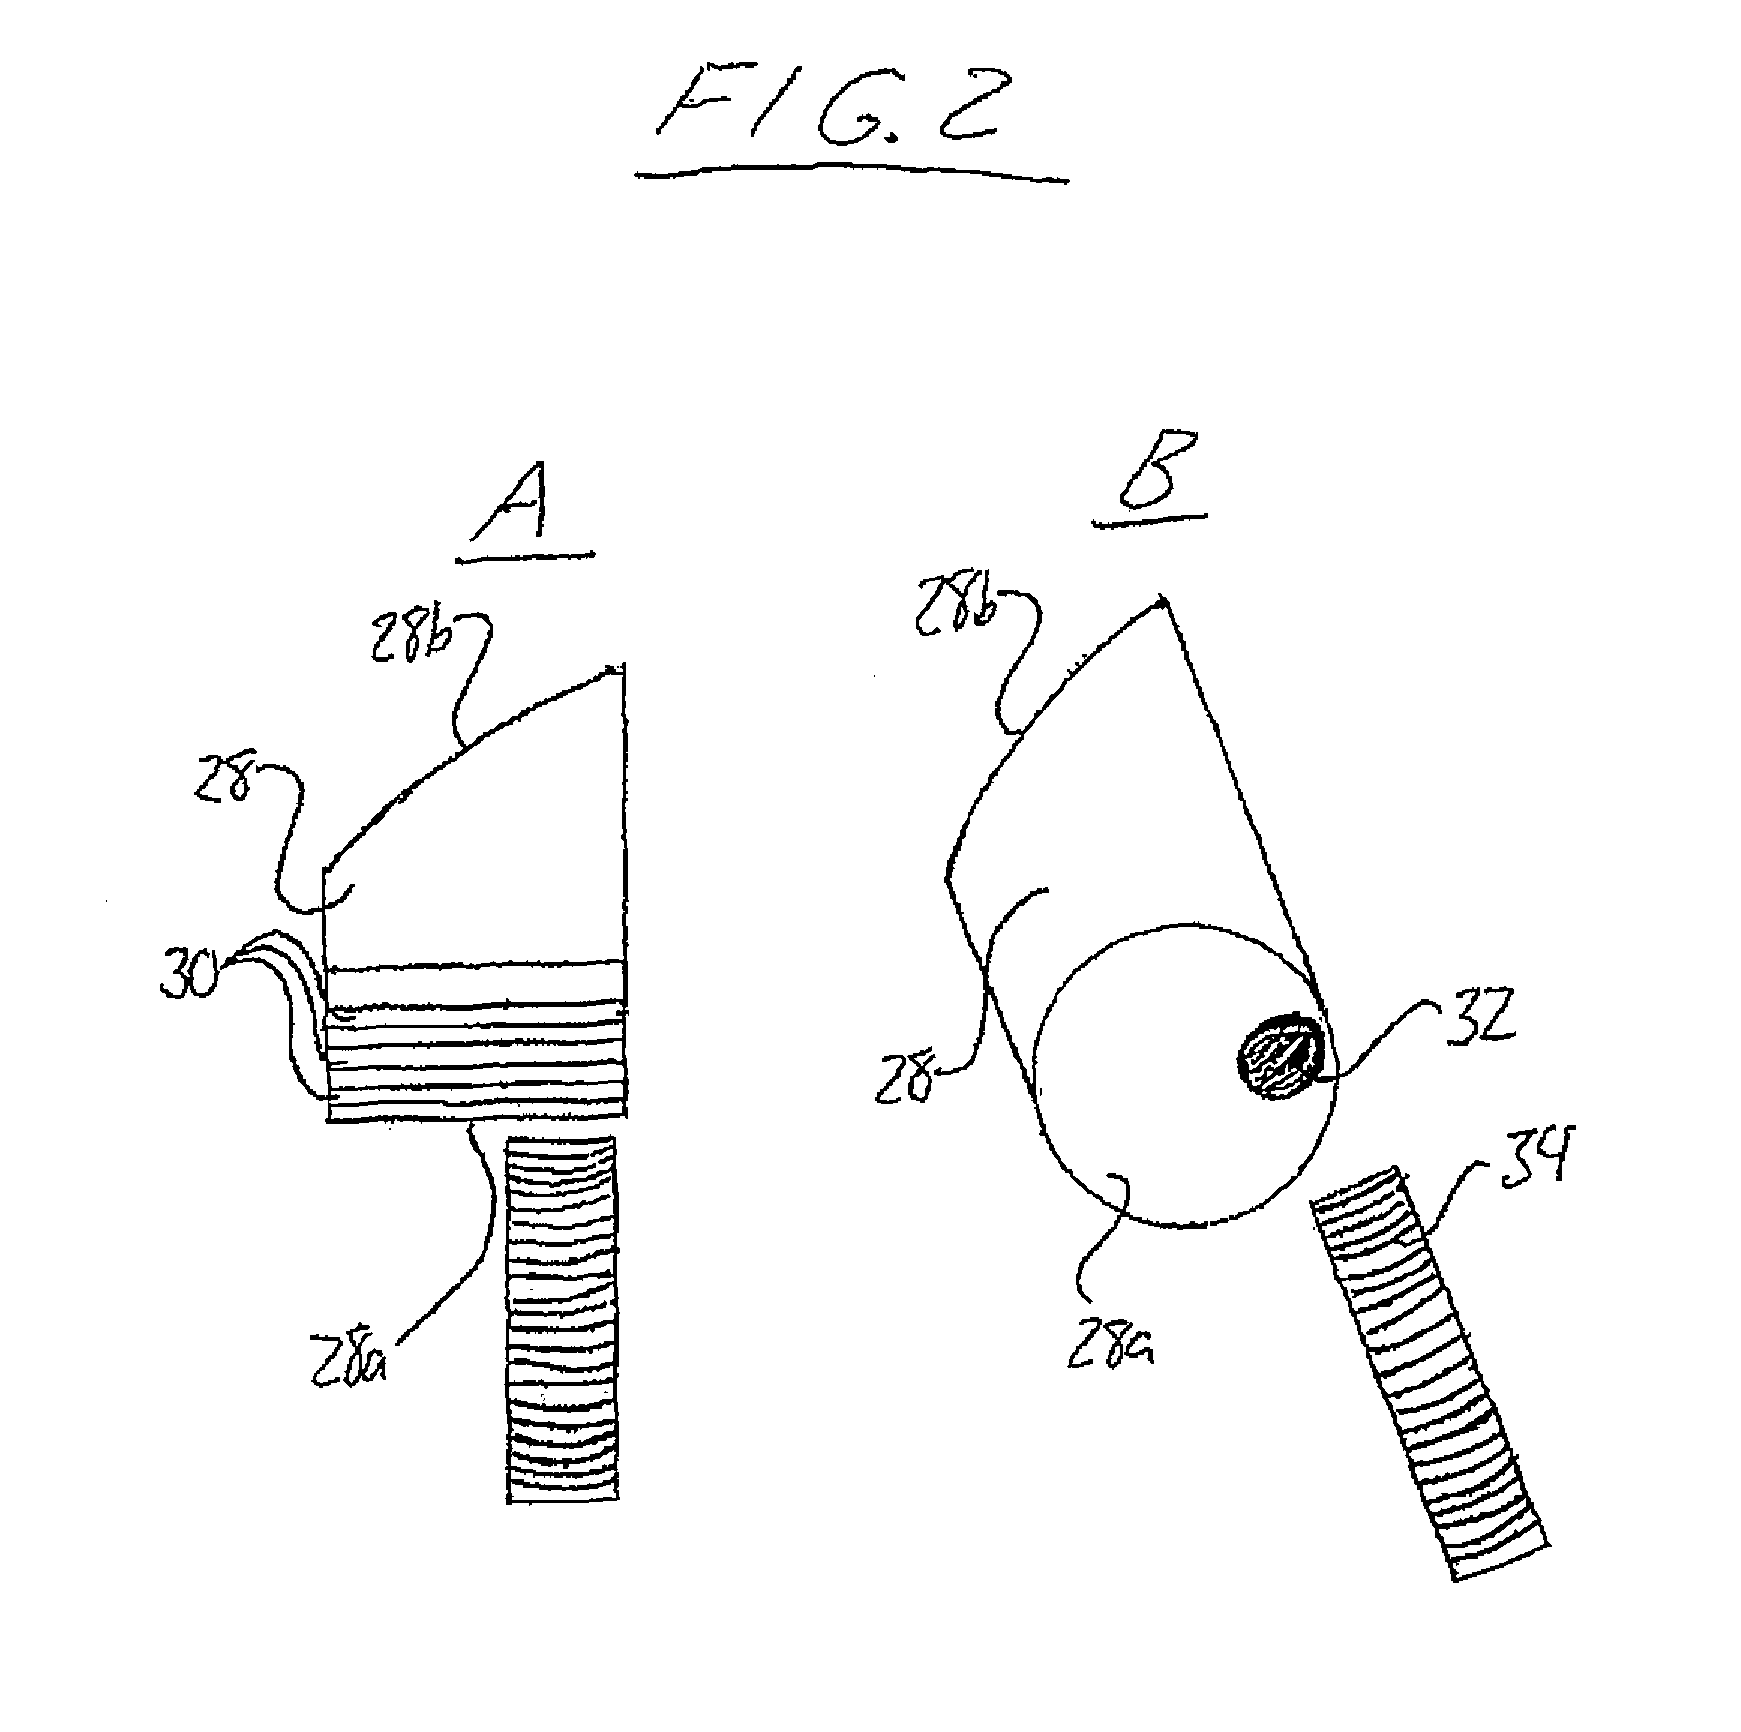 Internal combustion engine and compressor or pump with rotor and piston construction, and electrical generator pneumatically driven by same